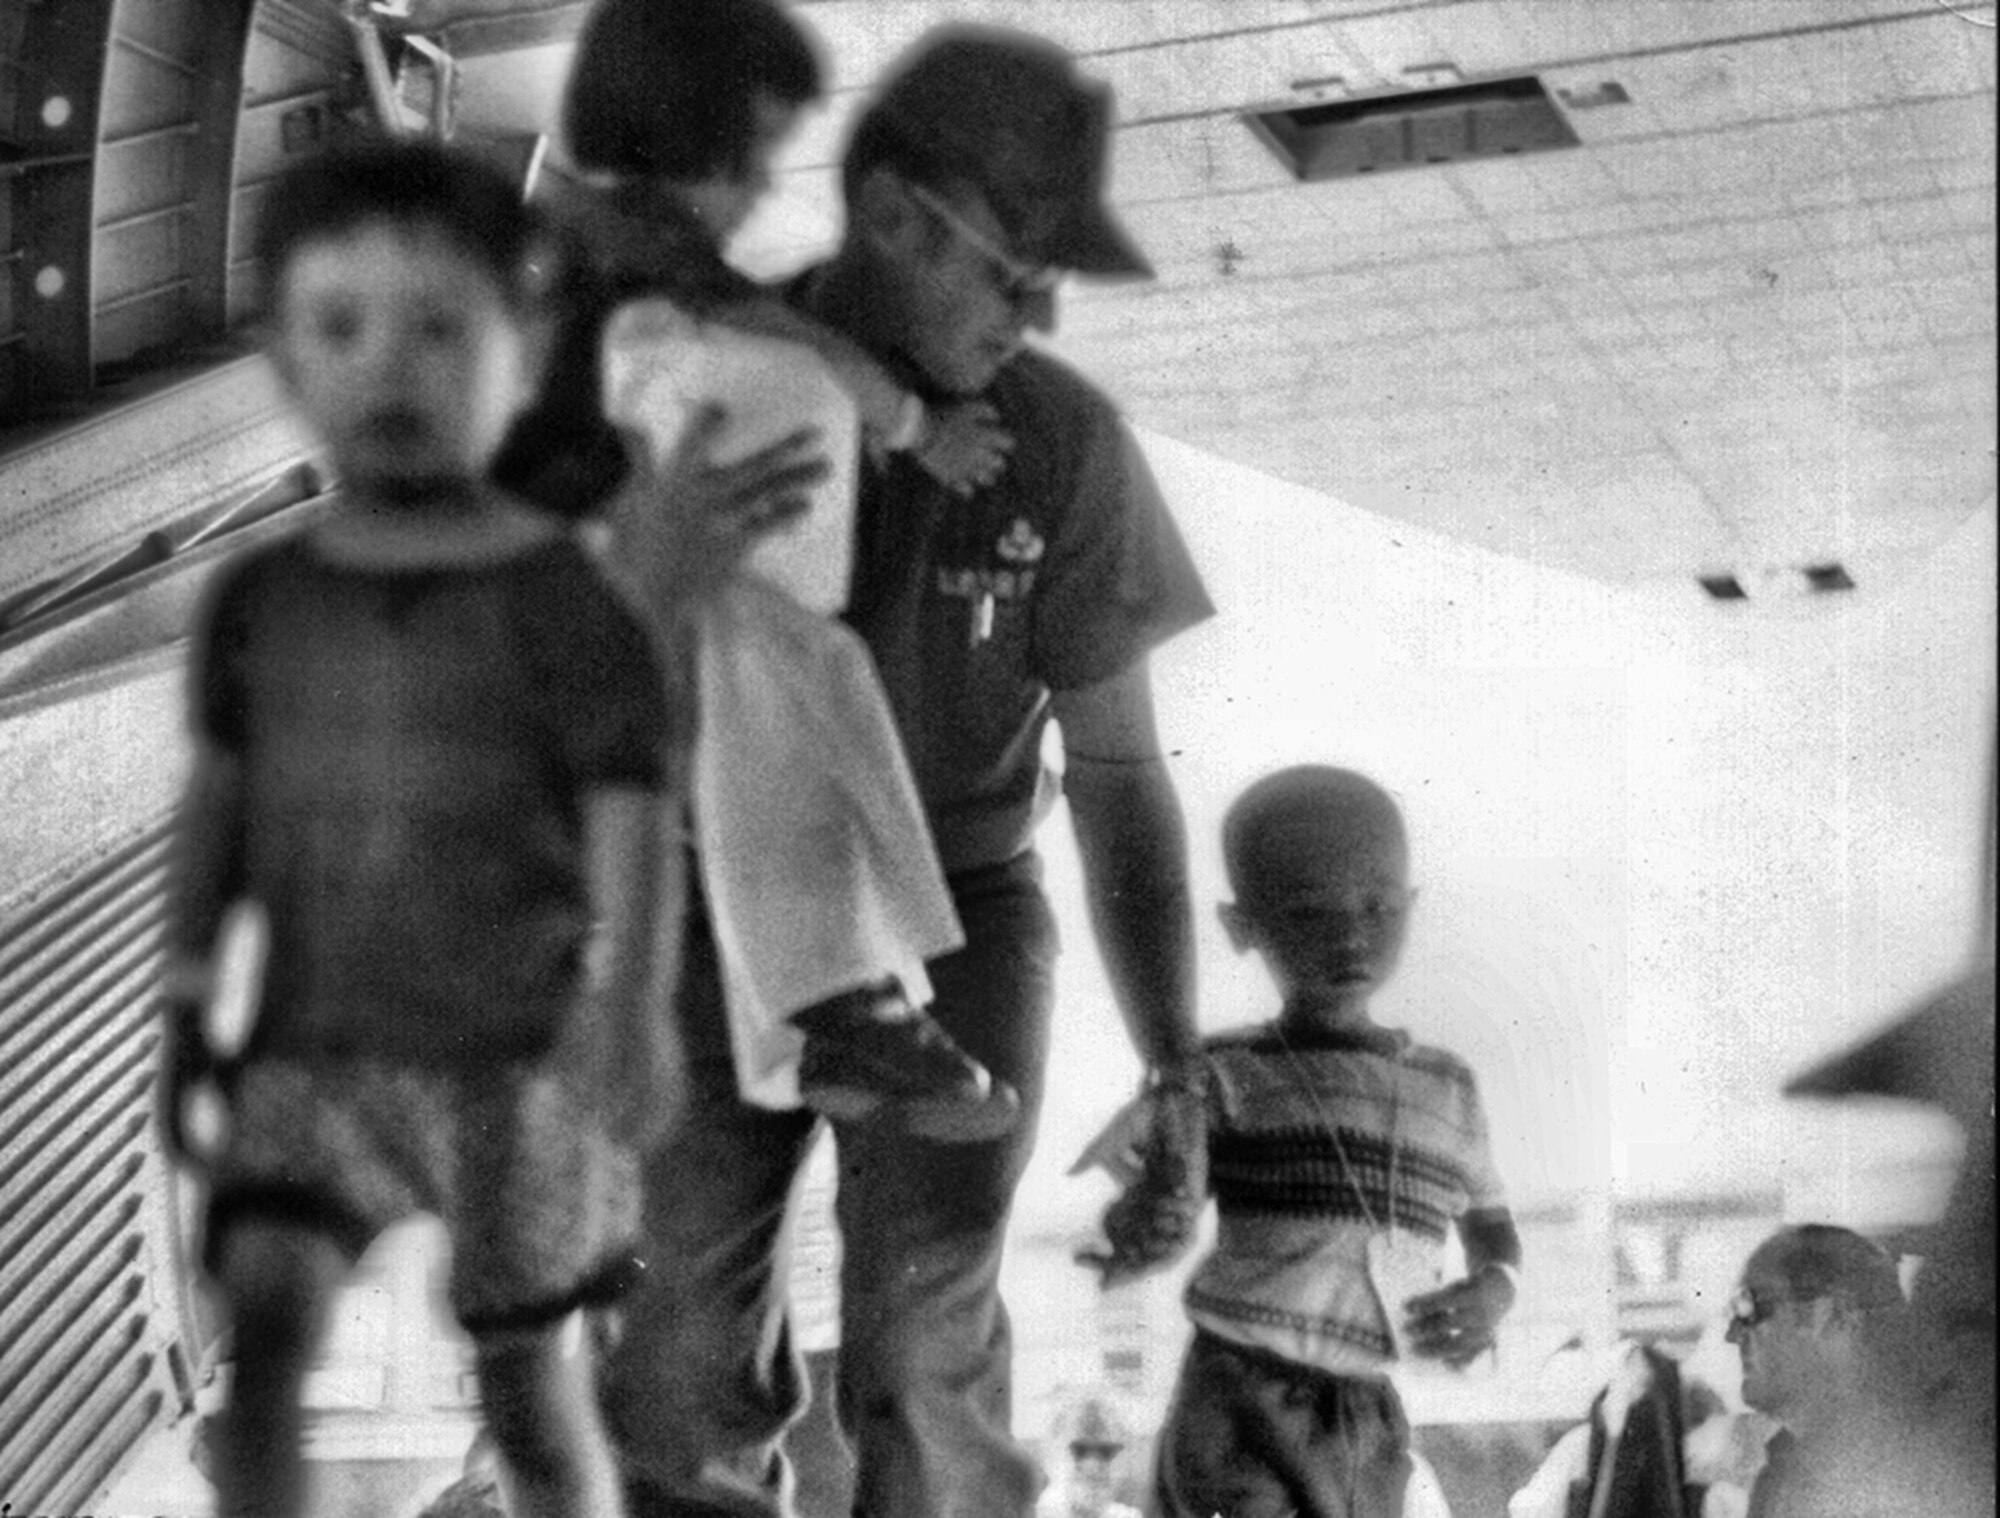 In 1975, the first all Reserve aircrew, commanded by Capt. John E. Tomkins, assisted in the evacuation of refugees from Saigon, South Vietnam. During a 17-day period, a total of five evacuation flights were flown from Saigon to the Philippines and Guam.    (Air Force File Photo)